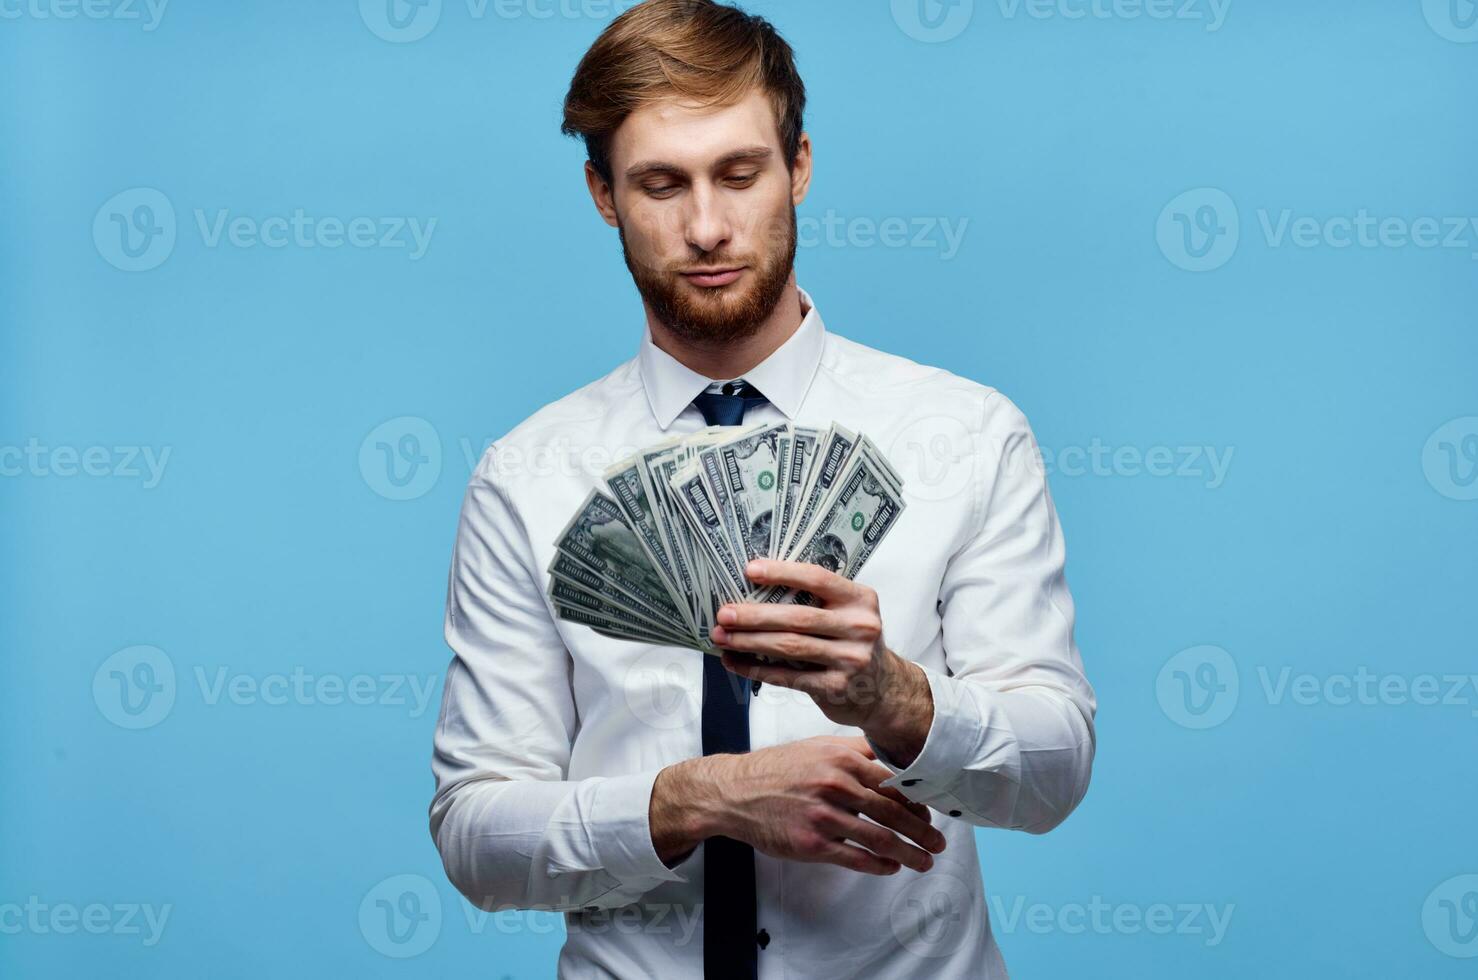 Cheerful man with money wealth executive finance photo